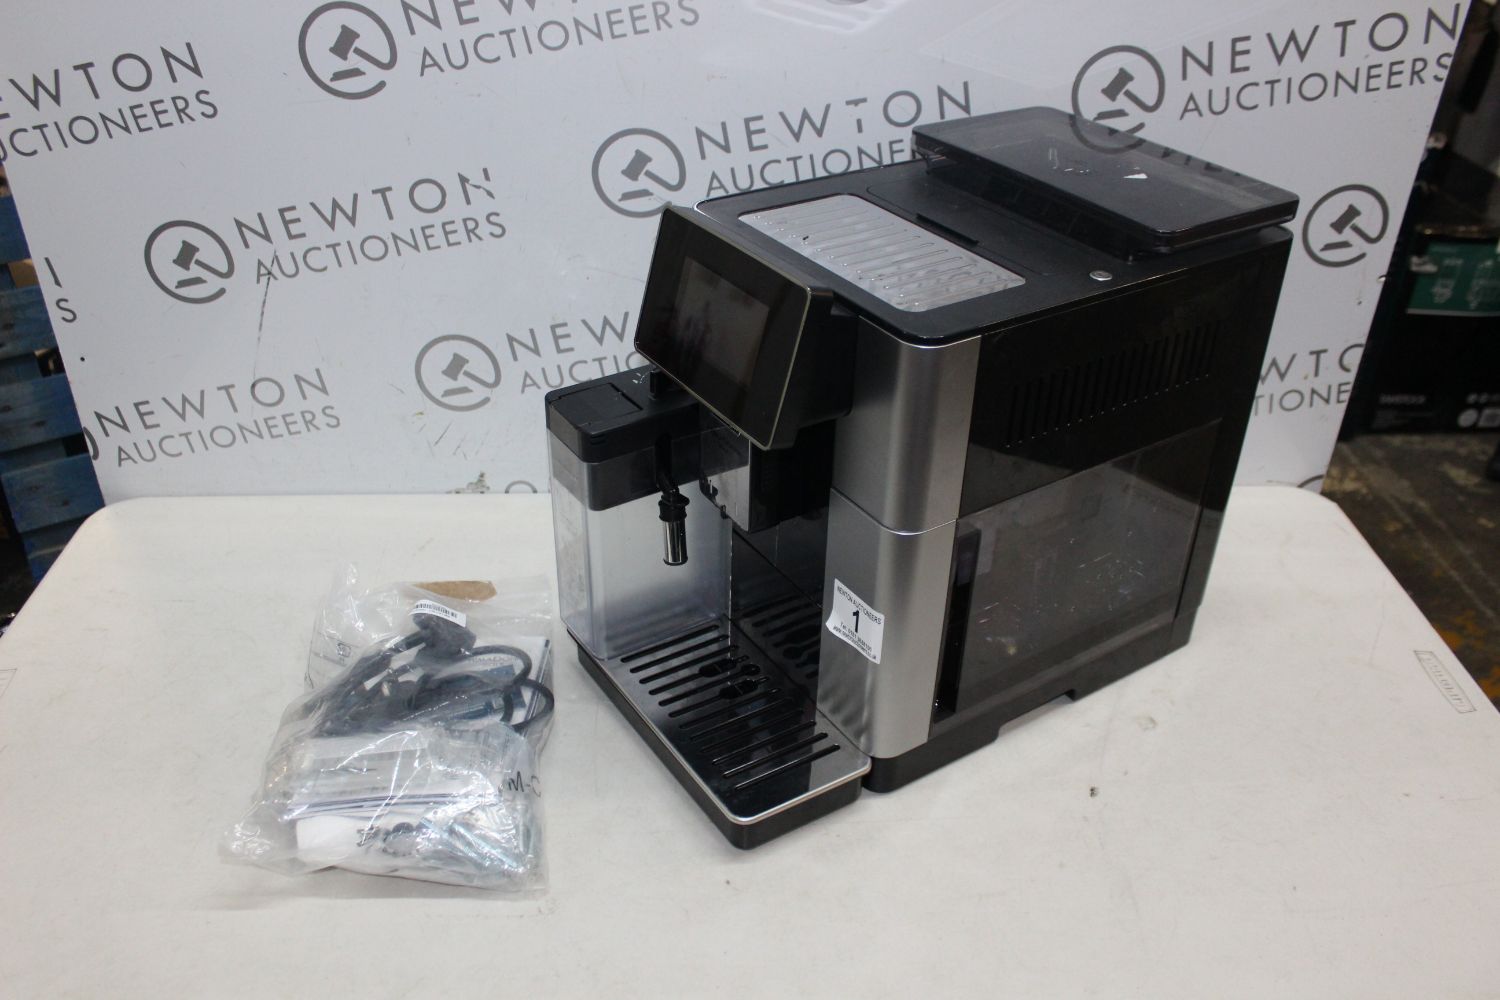 Online TIMED General Auction: Including Coffee Machines, Kitchen Appliances, Everyday Goods, Laptops, Appliances, Toys etc